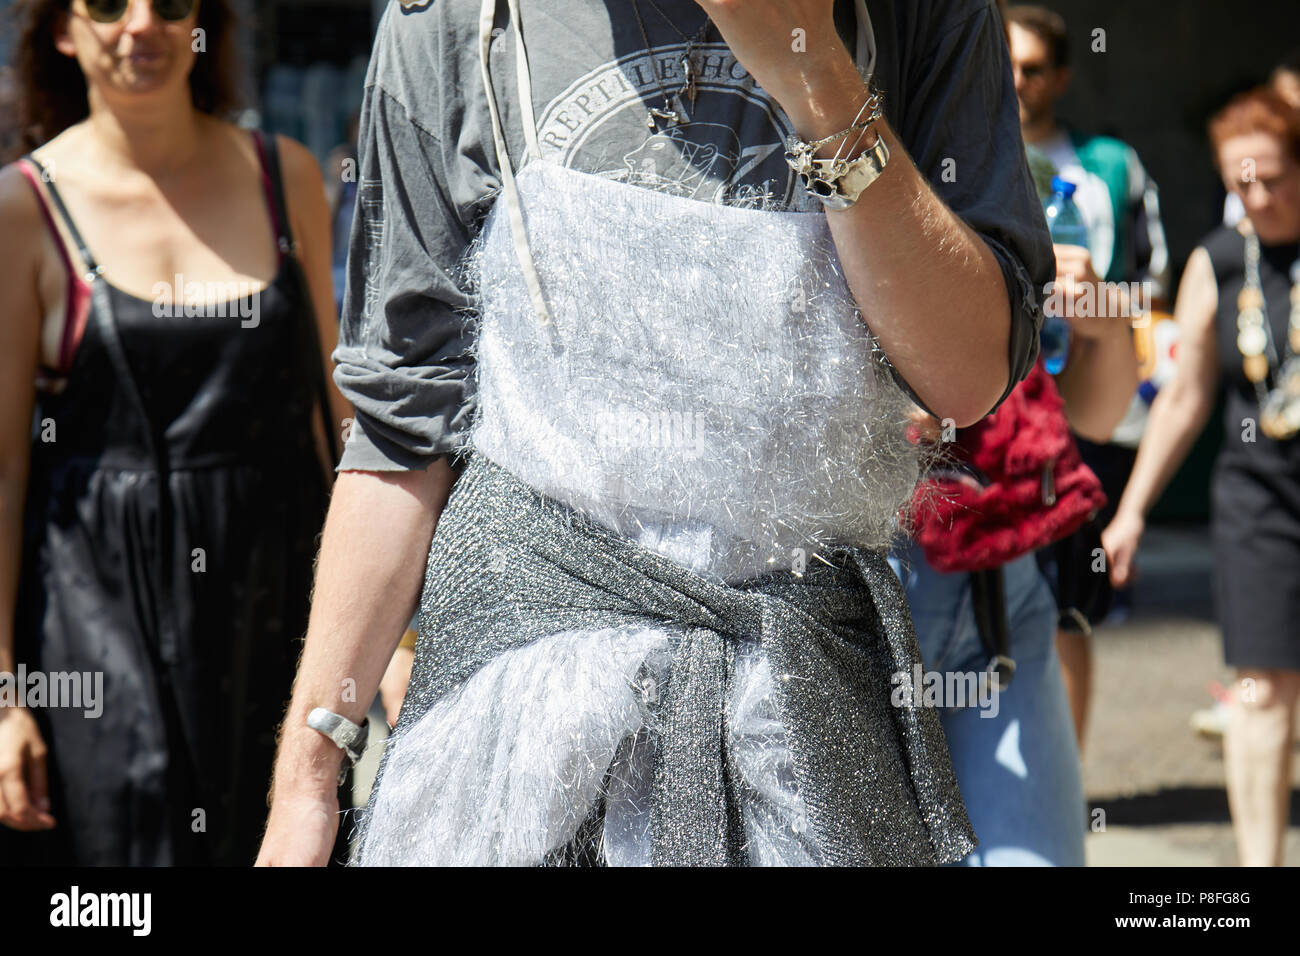 MILAN - JUNE 16: Man with silver shiny dress and skull bracelet before Marni fashion show, Milan Fashion Week street style on June 16, 2018 in Milan. Stock Photo